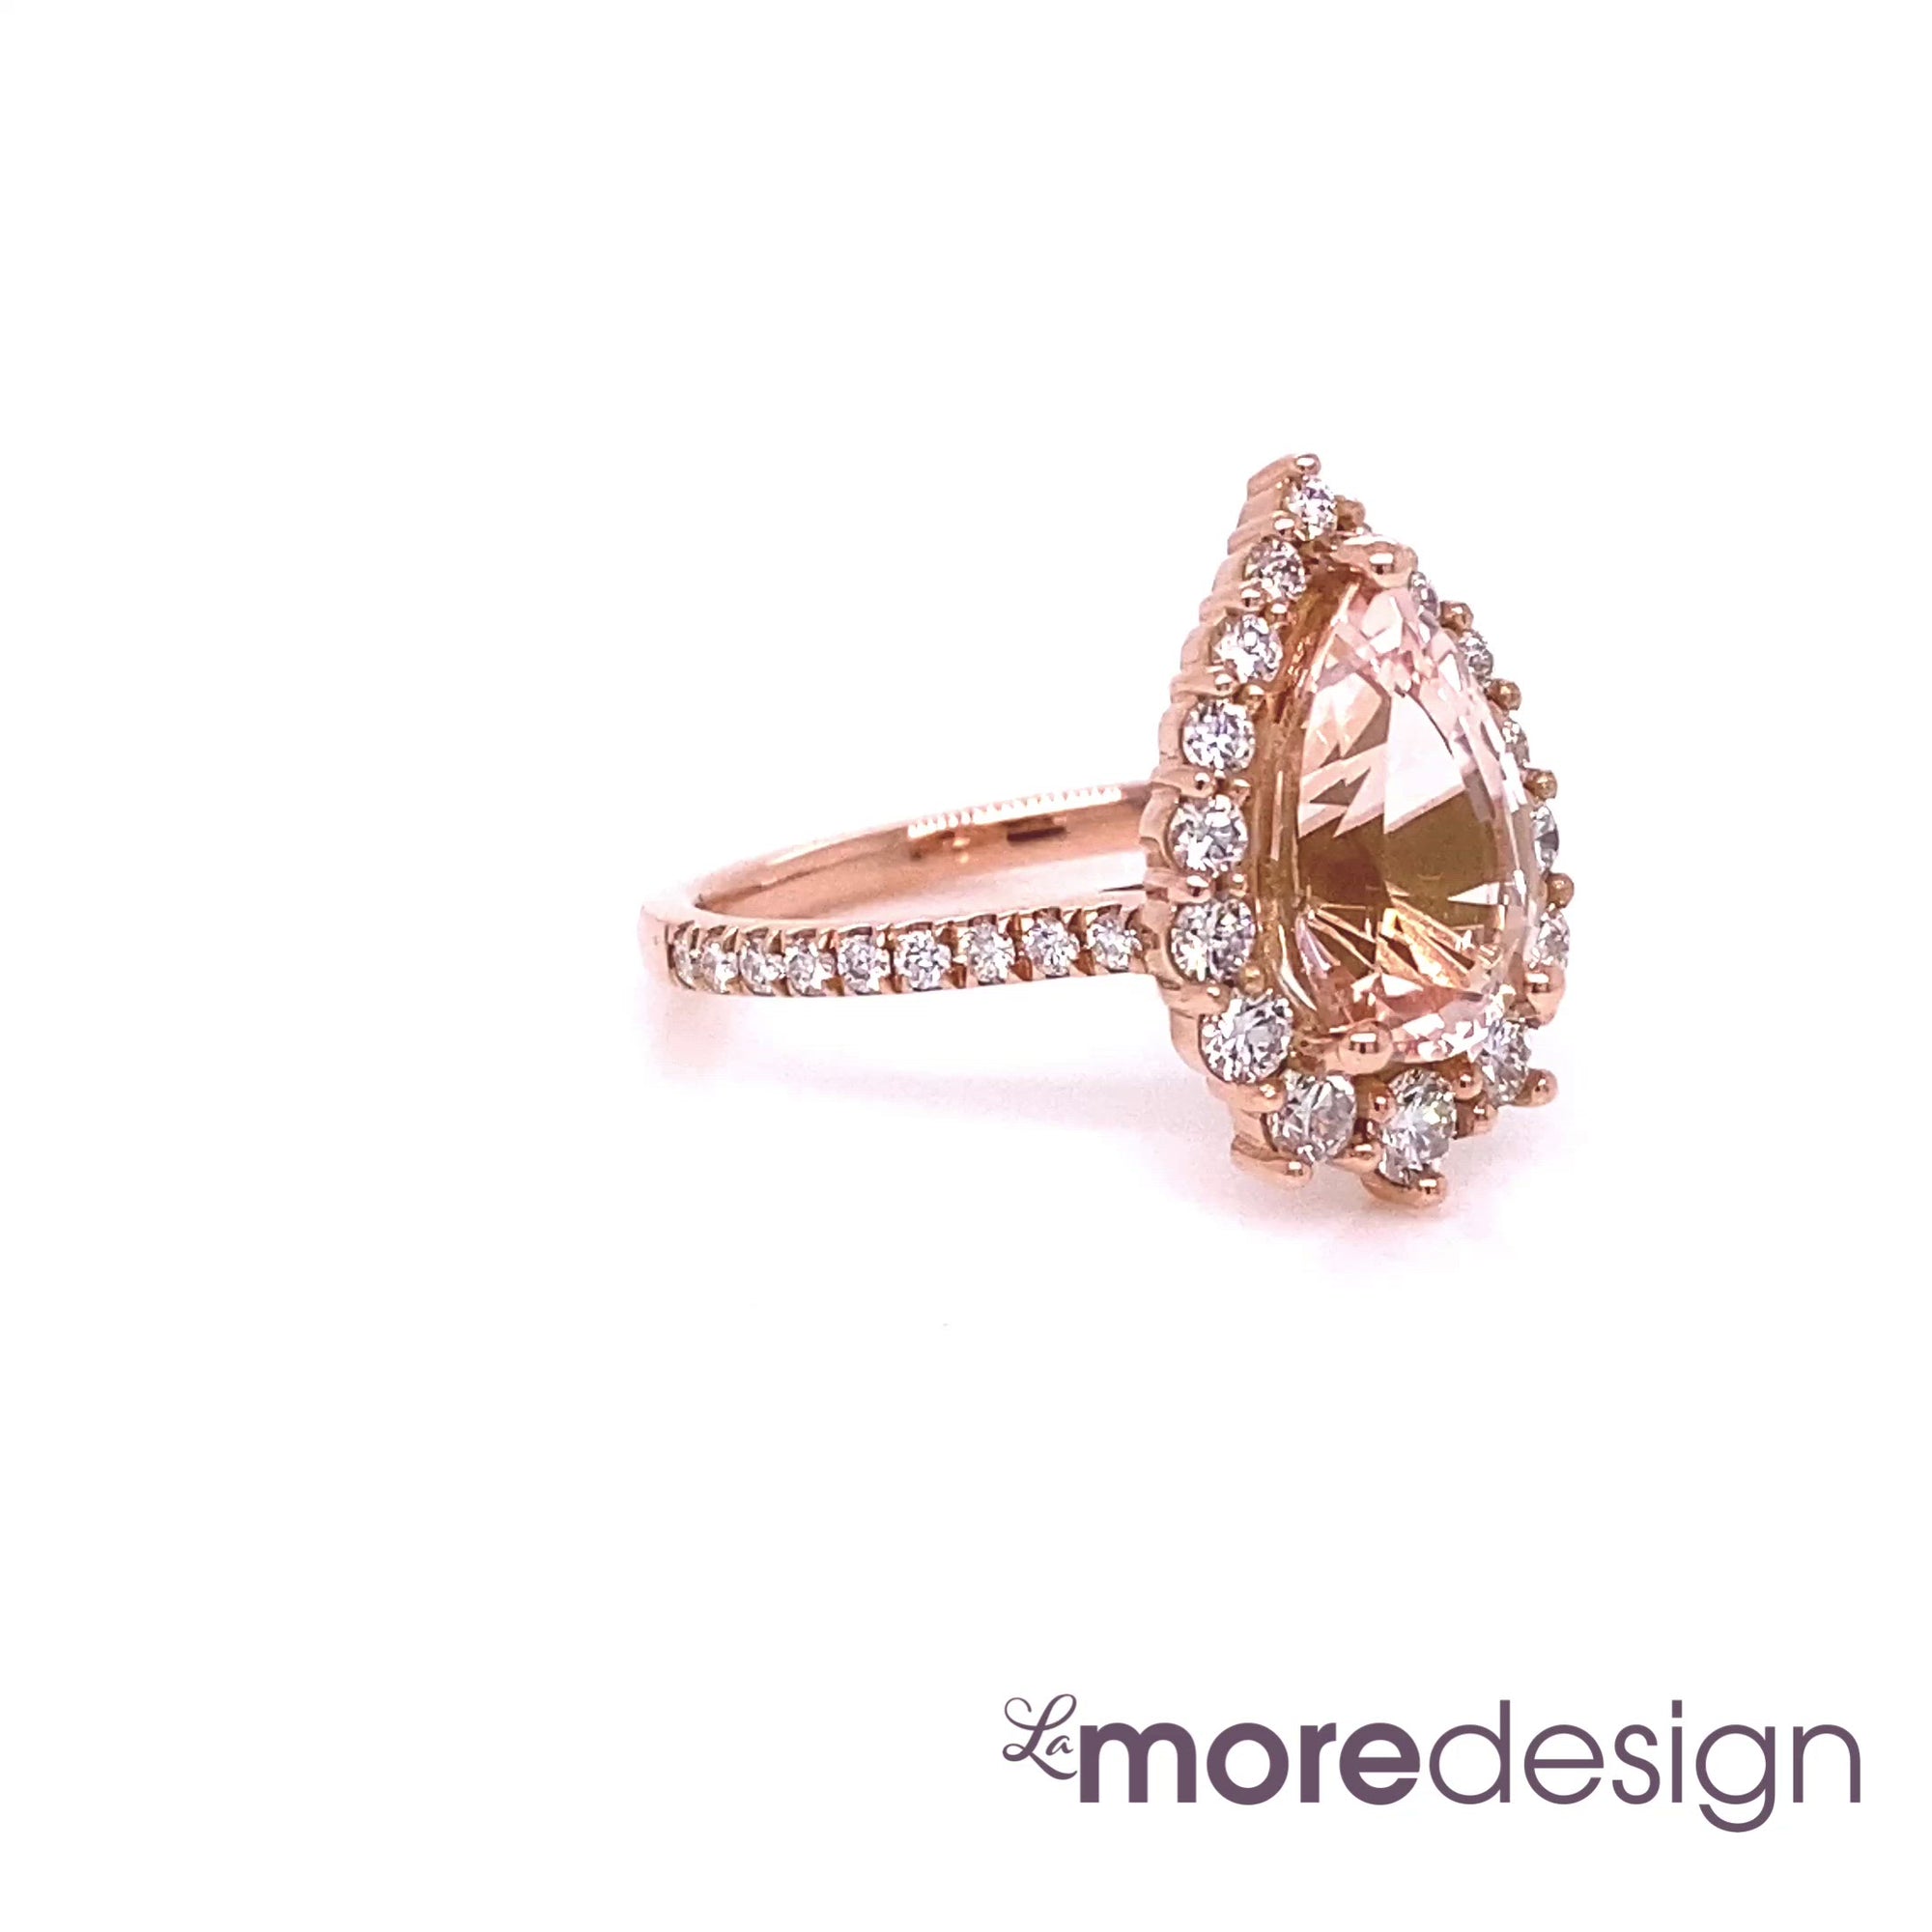 Breathtakingly unique and stunning! This morganite engagement ring is crafted in 14k rose gold Tiara Halo Diamond ring setting with a large 2.21-carat pear cut natural peach morganite center ~ total gemstone and diamond weight of the whole ring is 2.91 ct.tw. This one-of-a-kind pear-cut engagement ring is perfect for brides looking for diamond alternative engagement rings! All our wedding bands can pair beautifully with this gorgeous halo diamond morganite ring!